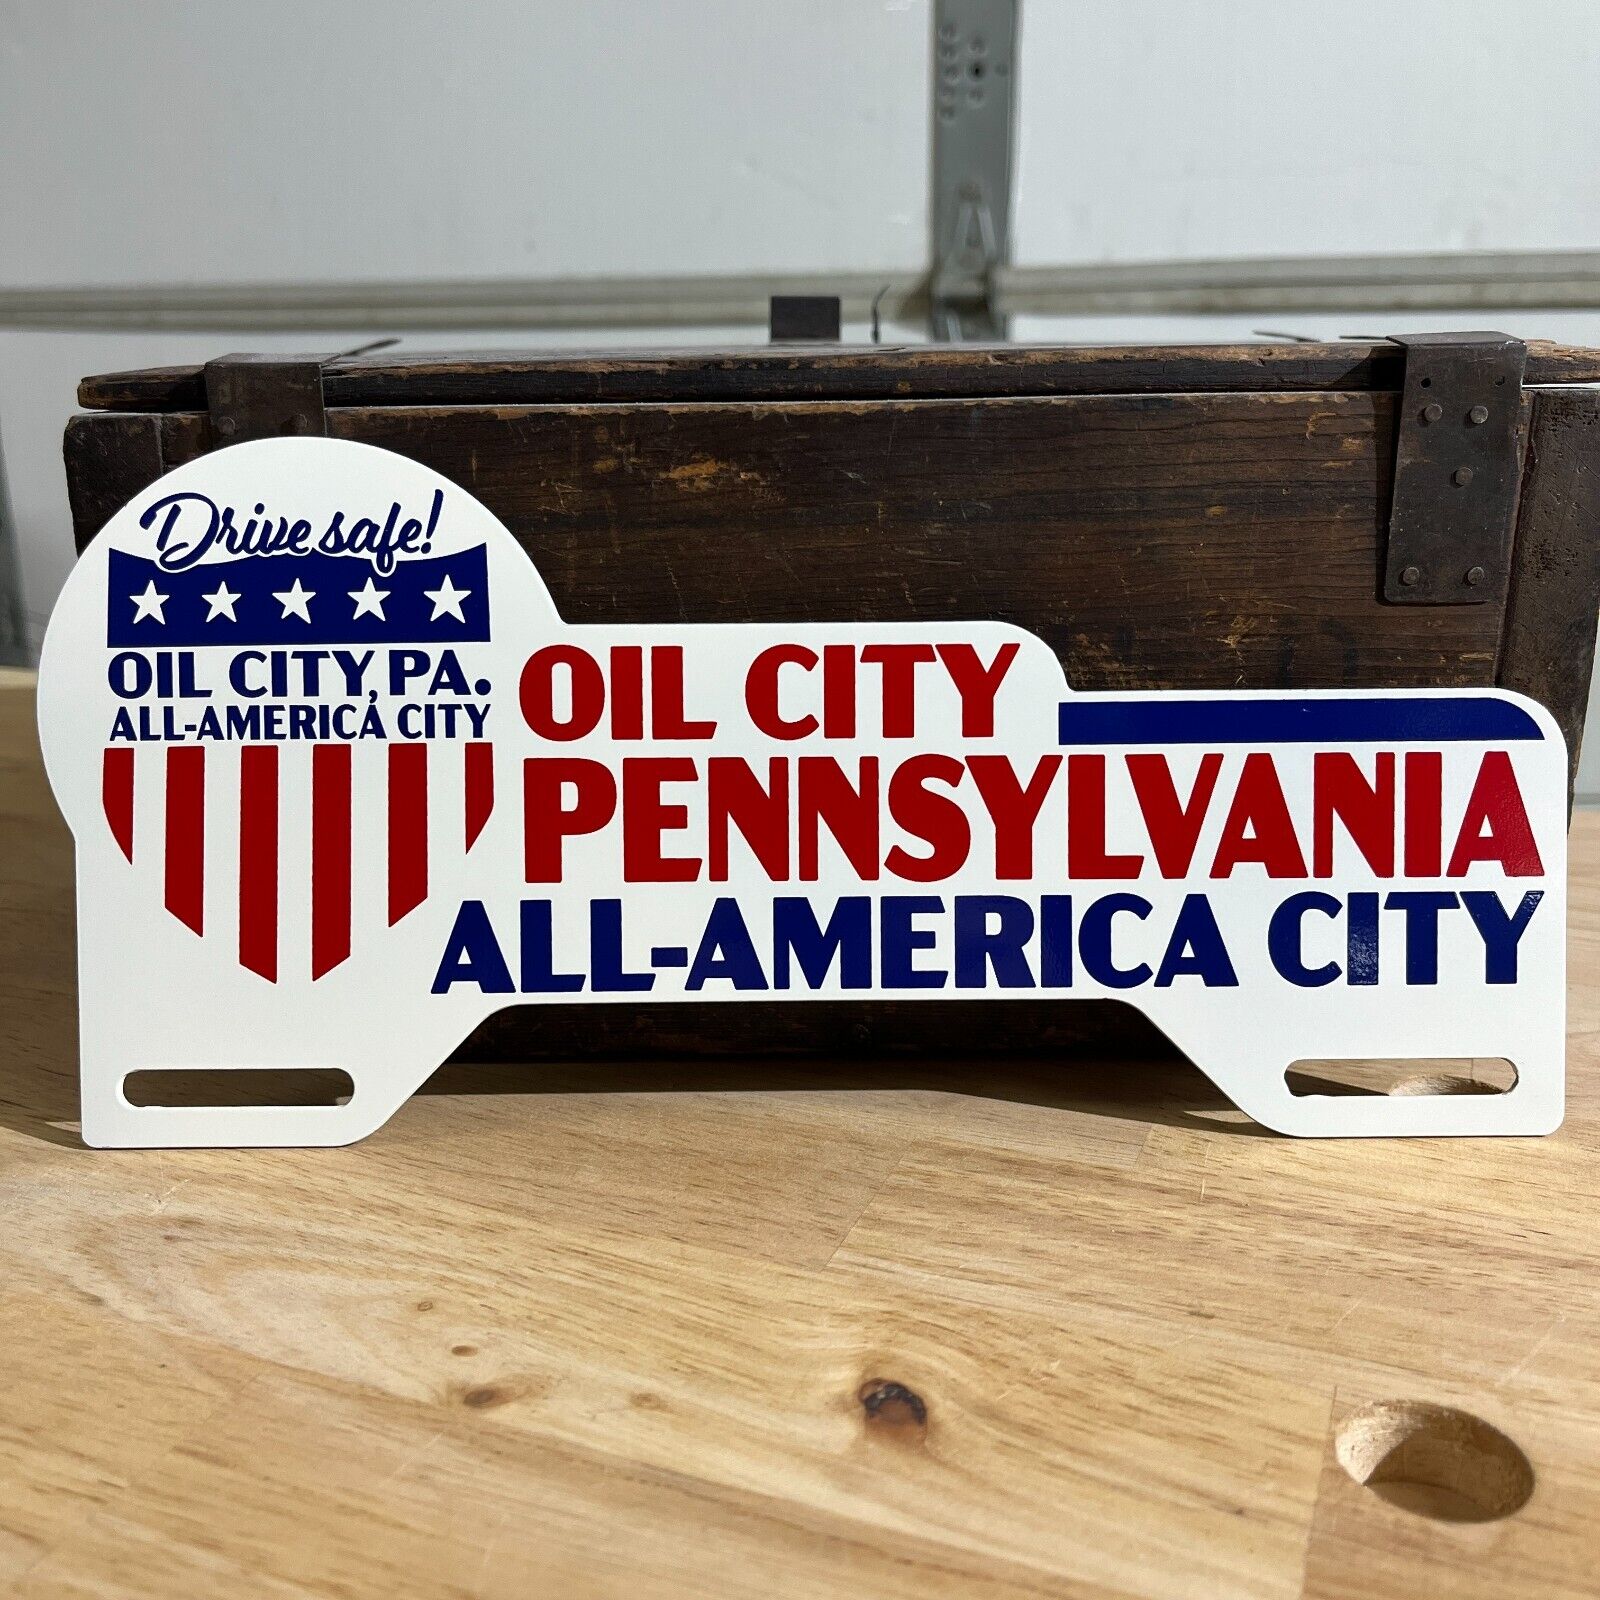 Oil City Pennsylvania All America City Metal License Plate Tag Topper Sign